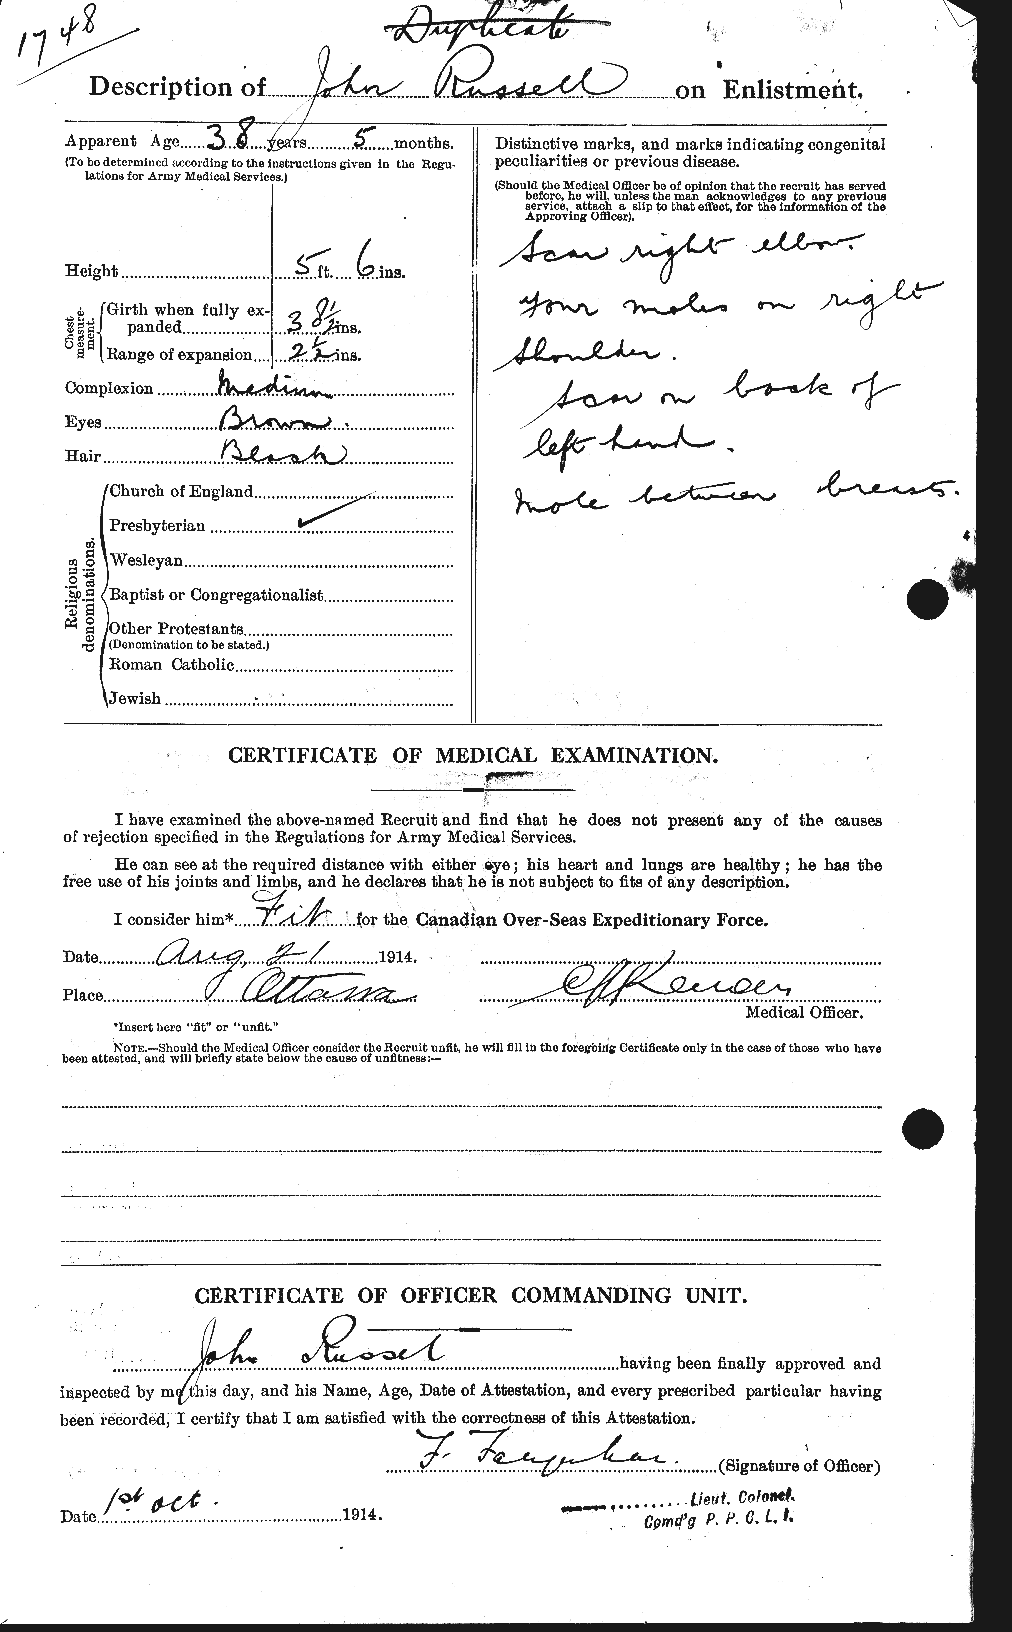 Personnel Records of the First World War - CEF 619091b